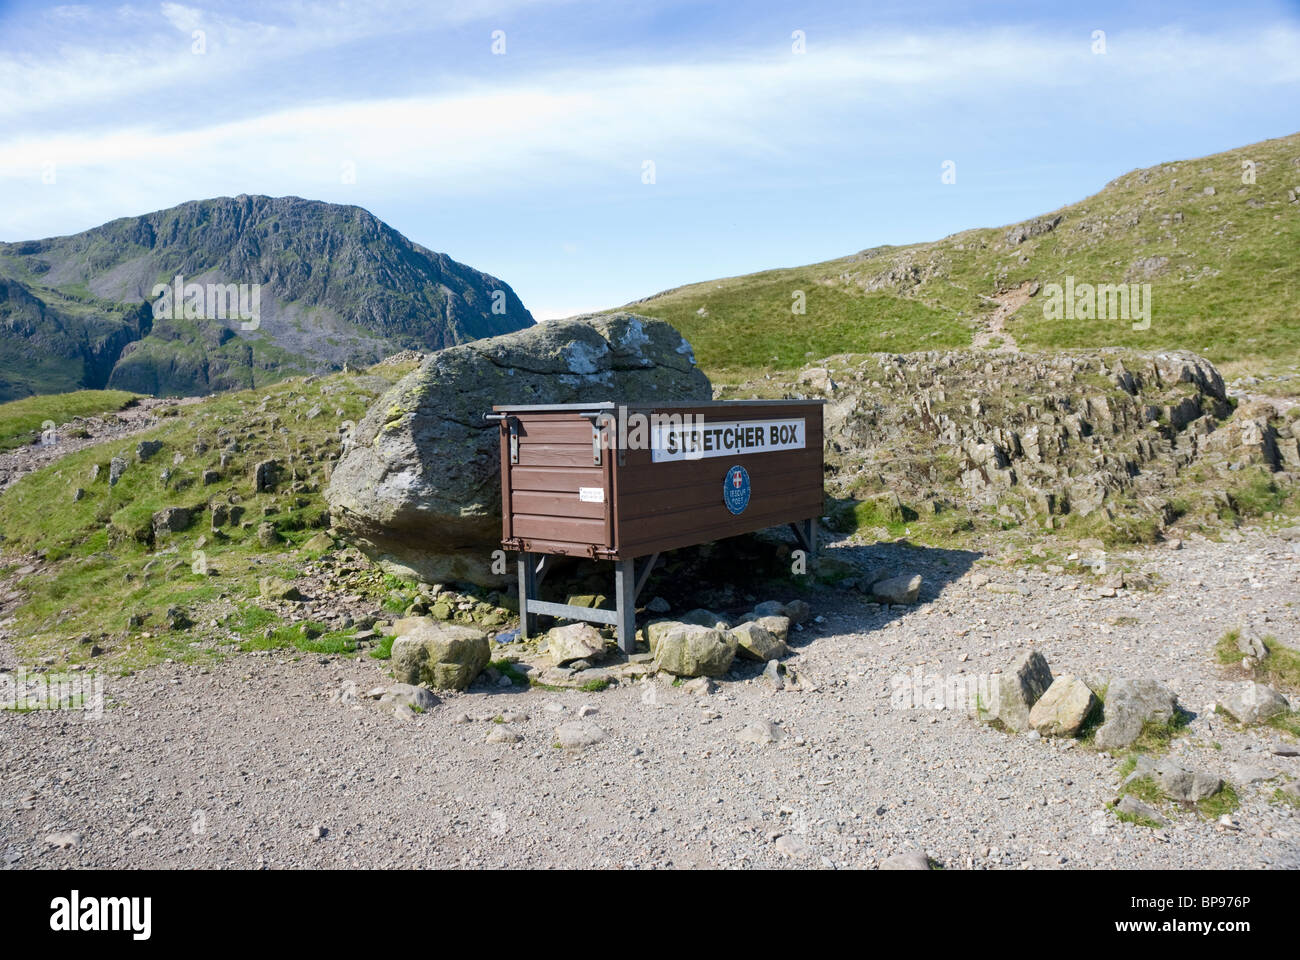 Mountain Rescue Stretcher Box at Sty Head, near Great Gable and the Scafell range Stock Photo